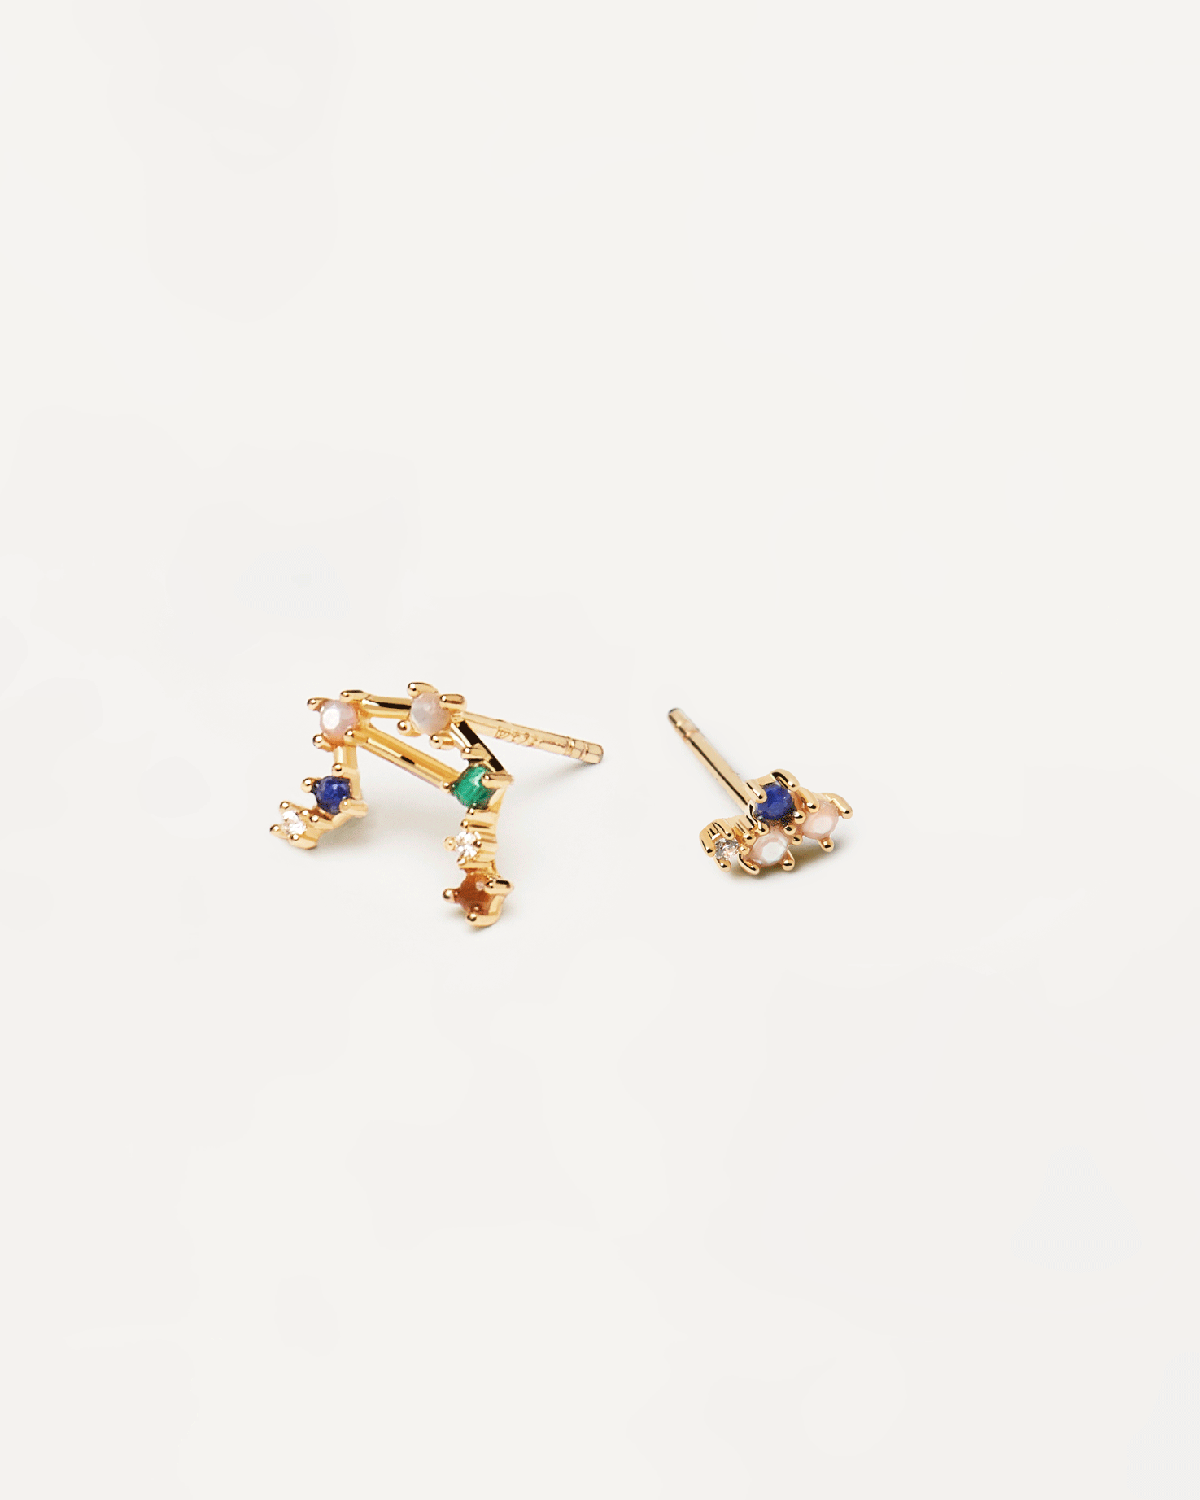 2021 Selection | Libra Earrings. Get the latest arrival from PDPAOLA. Place your order safely and get this Best Seller. Free Shipping over 70€